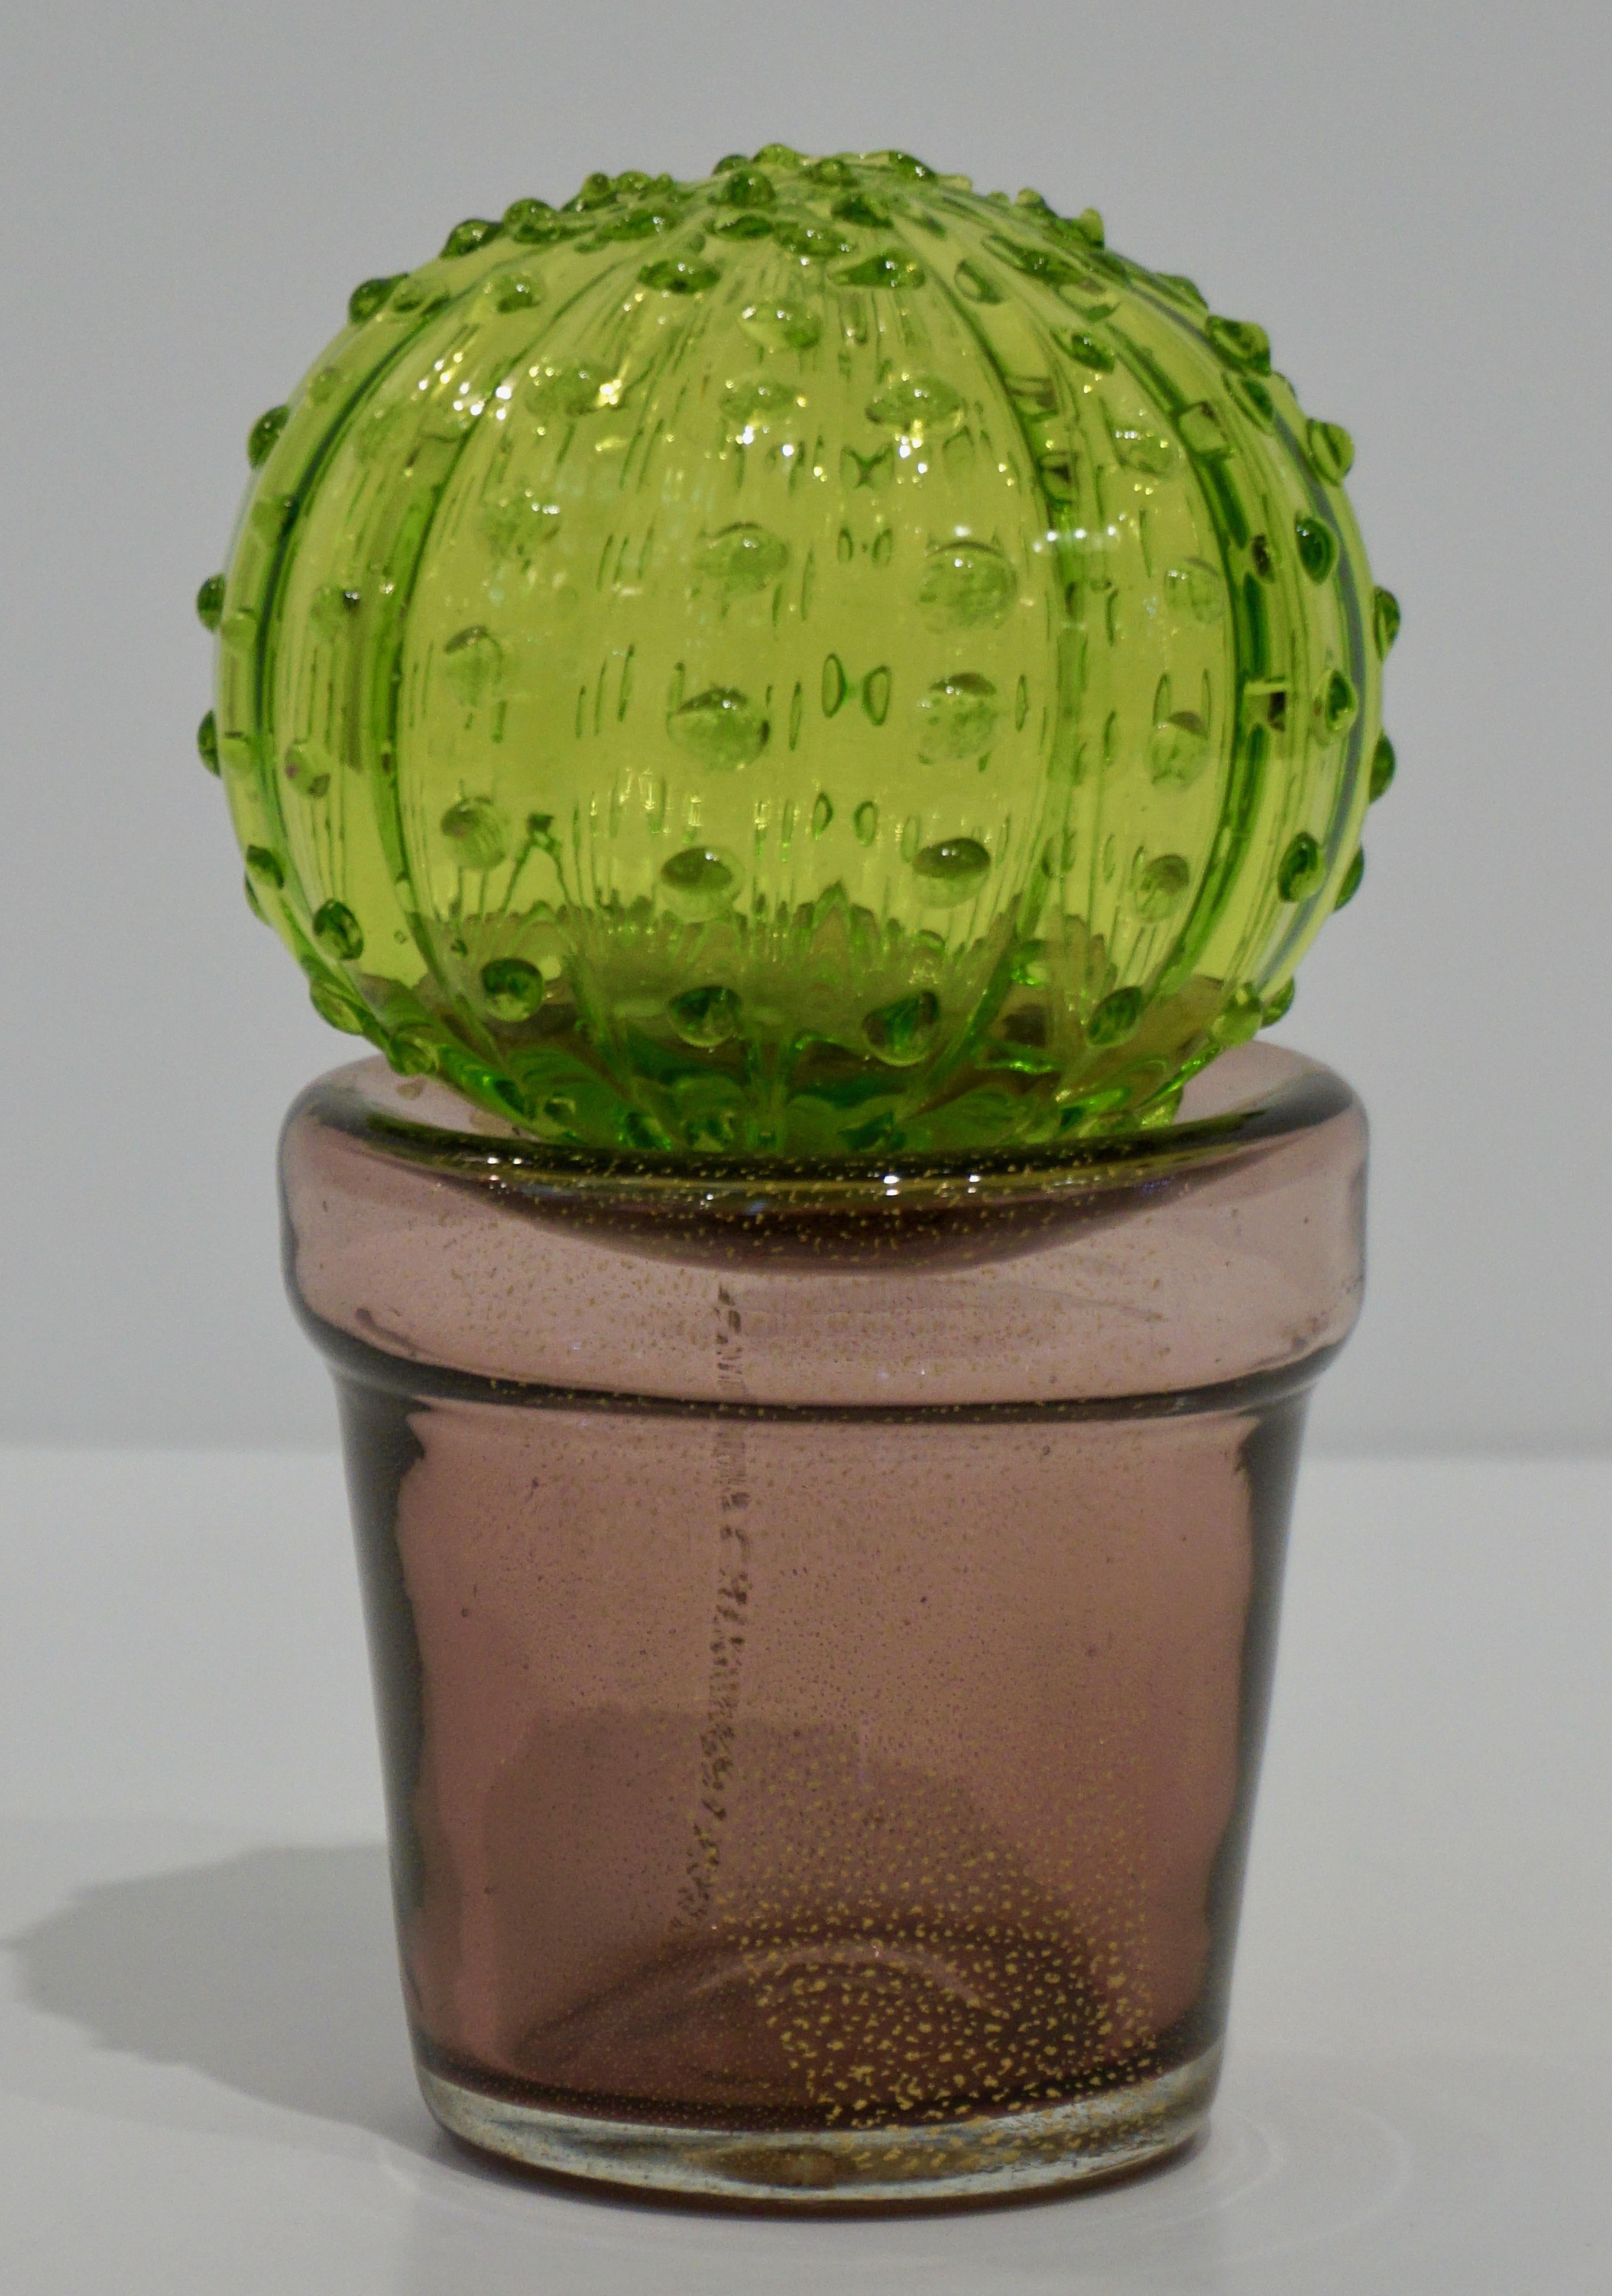 1990s Italian highly collectible Venetian glass cactus of limited edition, entirely handcrafted in Murano, with modern Minimalist design blown by Formia, in a lifelike organic modernist shape in blown jade apple green Murano glass highlighted with